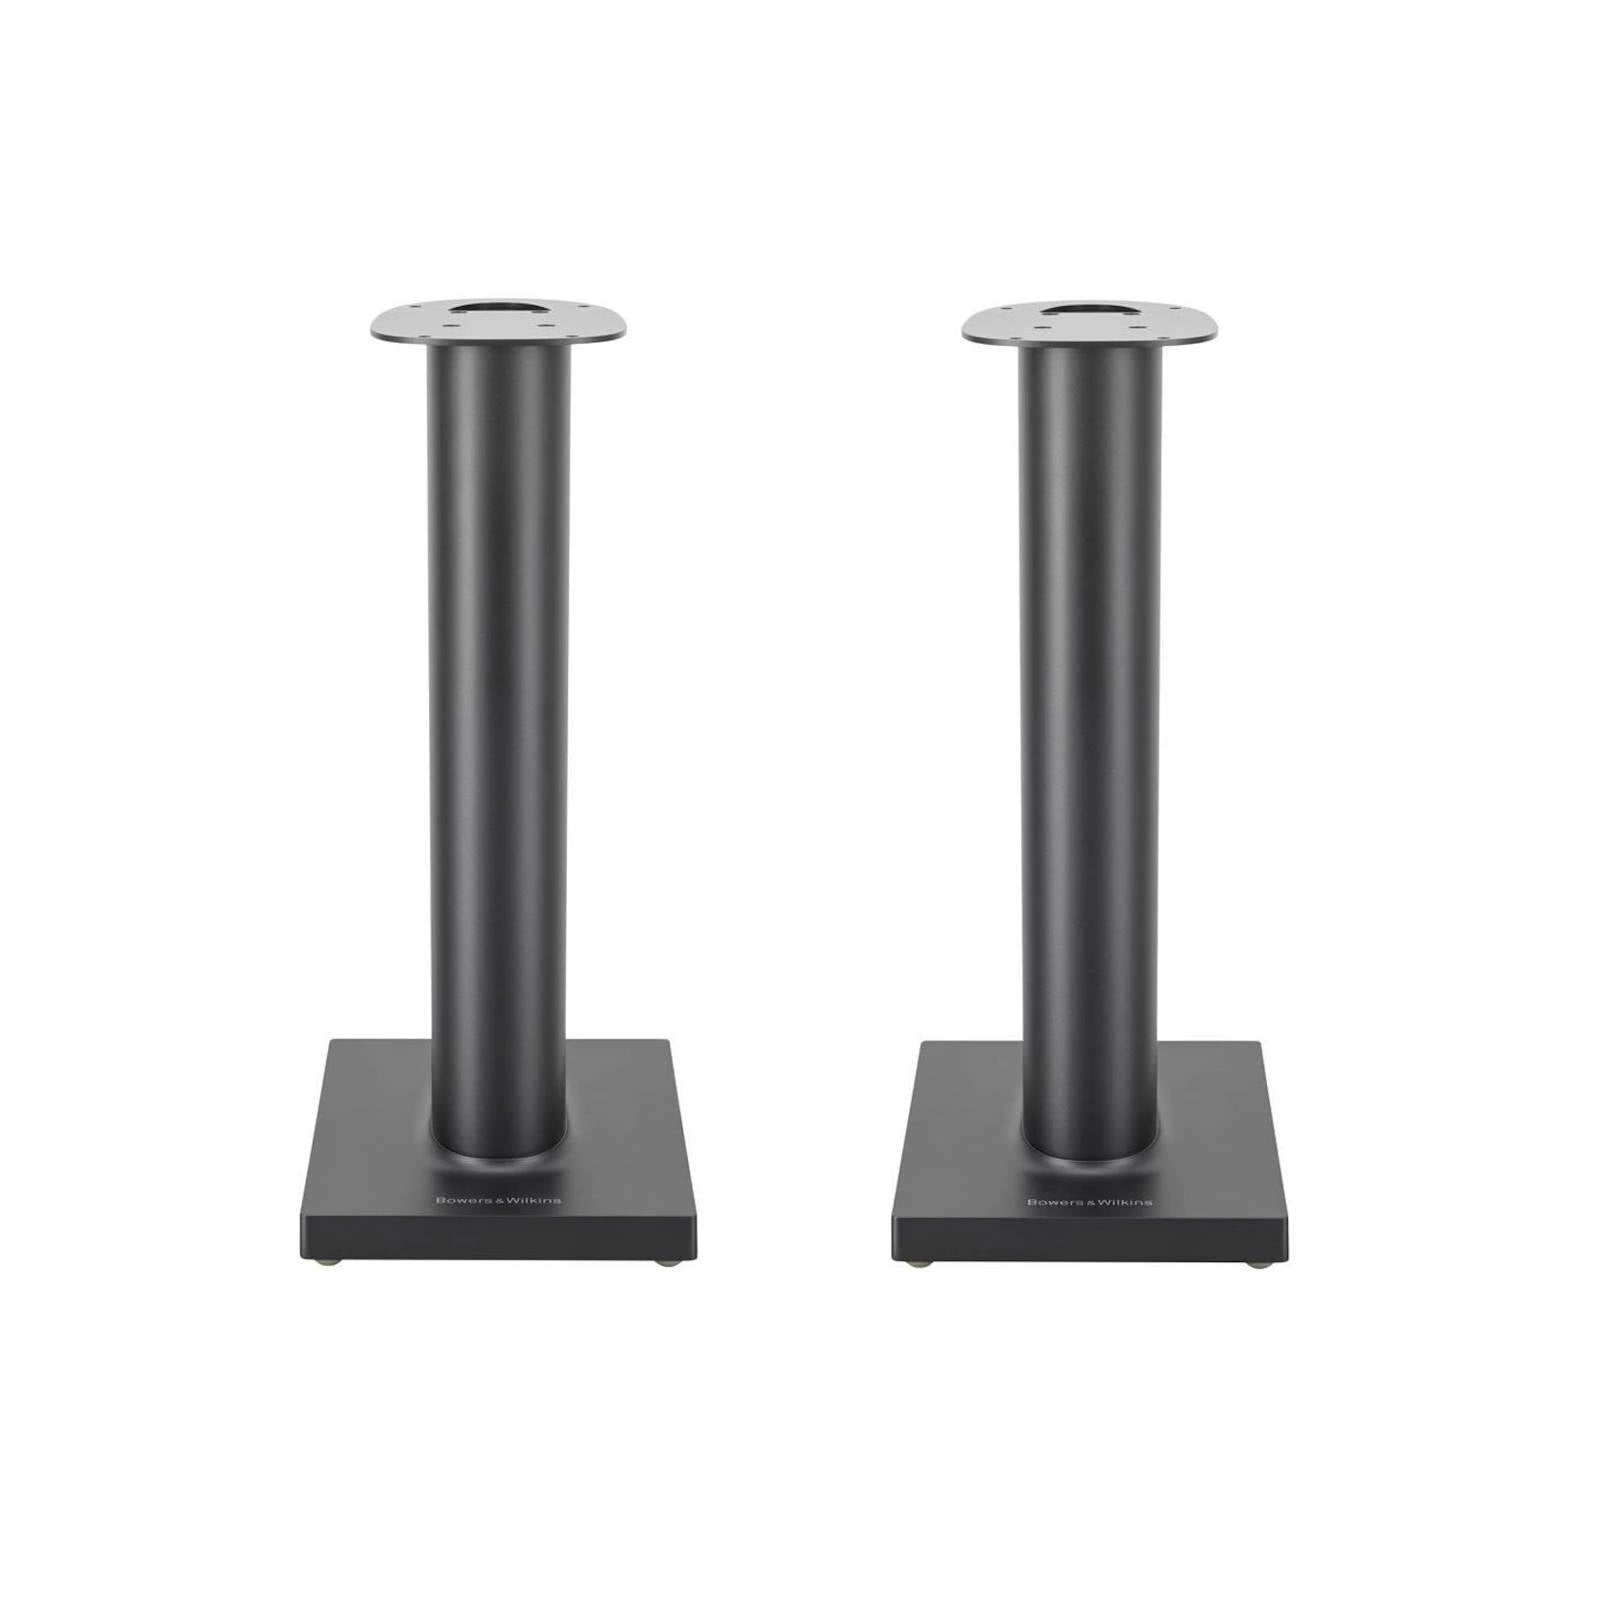 Bowers & Wilkins (B&W) Formation Duo FS Stands (Black) - Ooberpad India